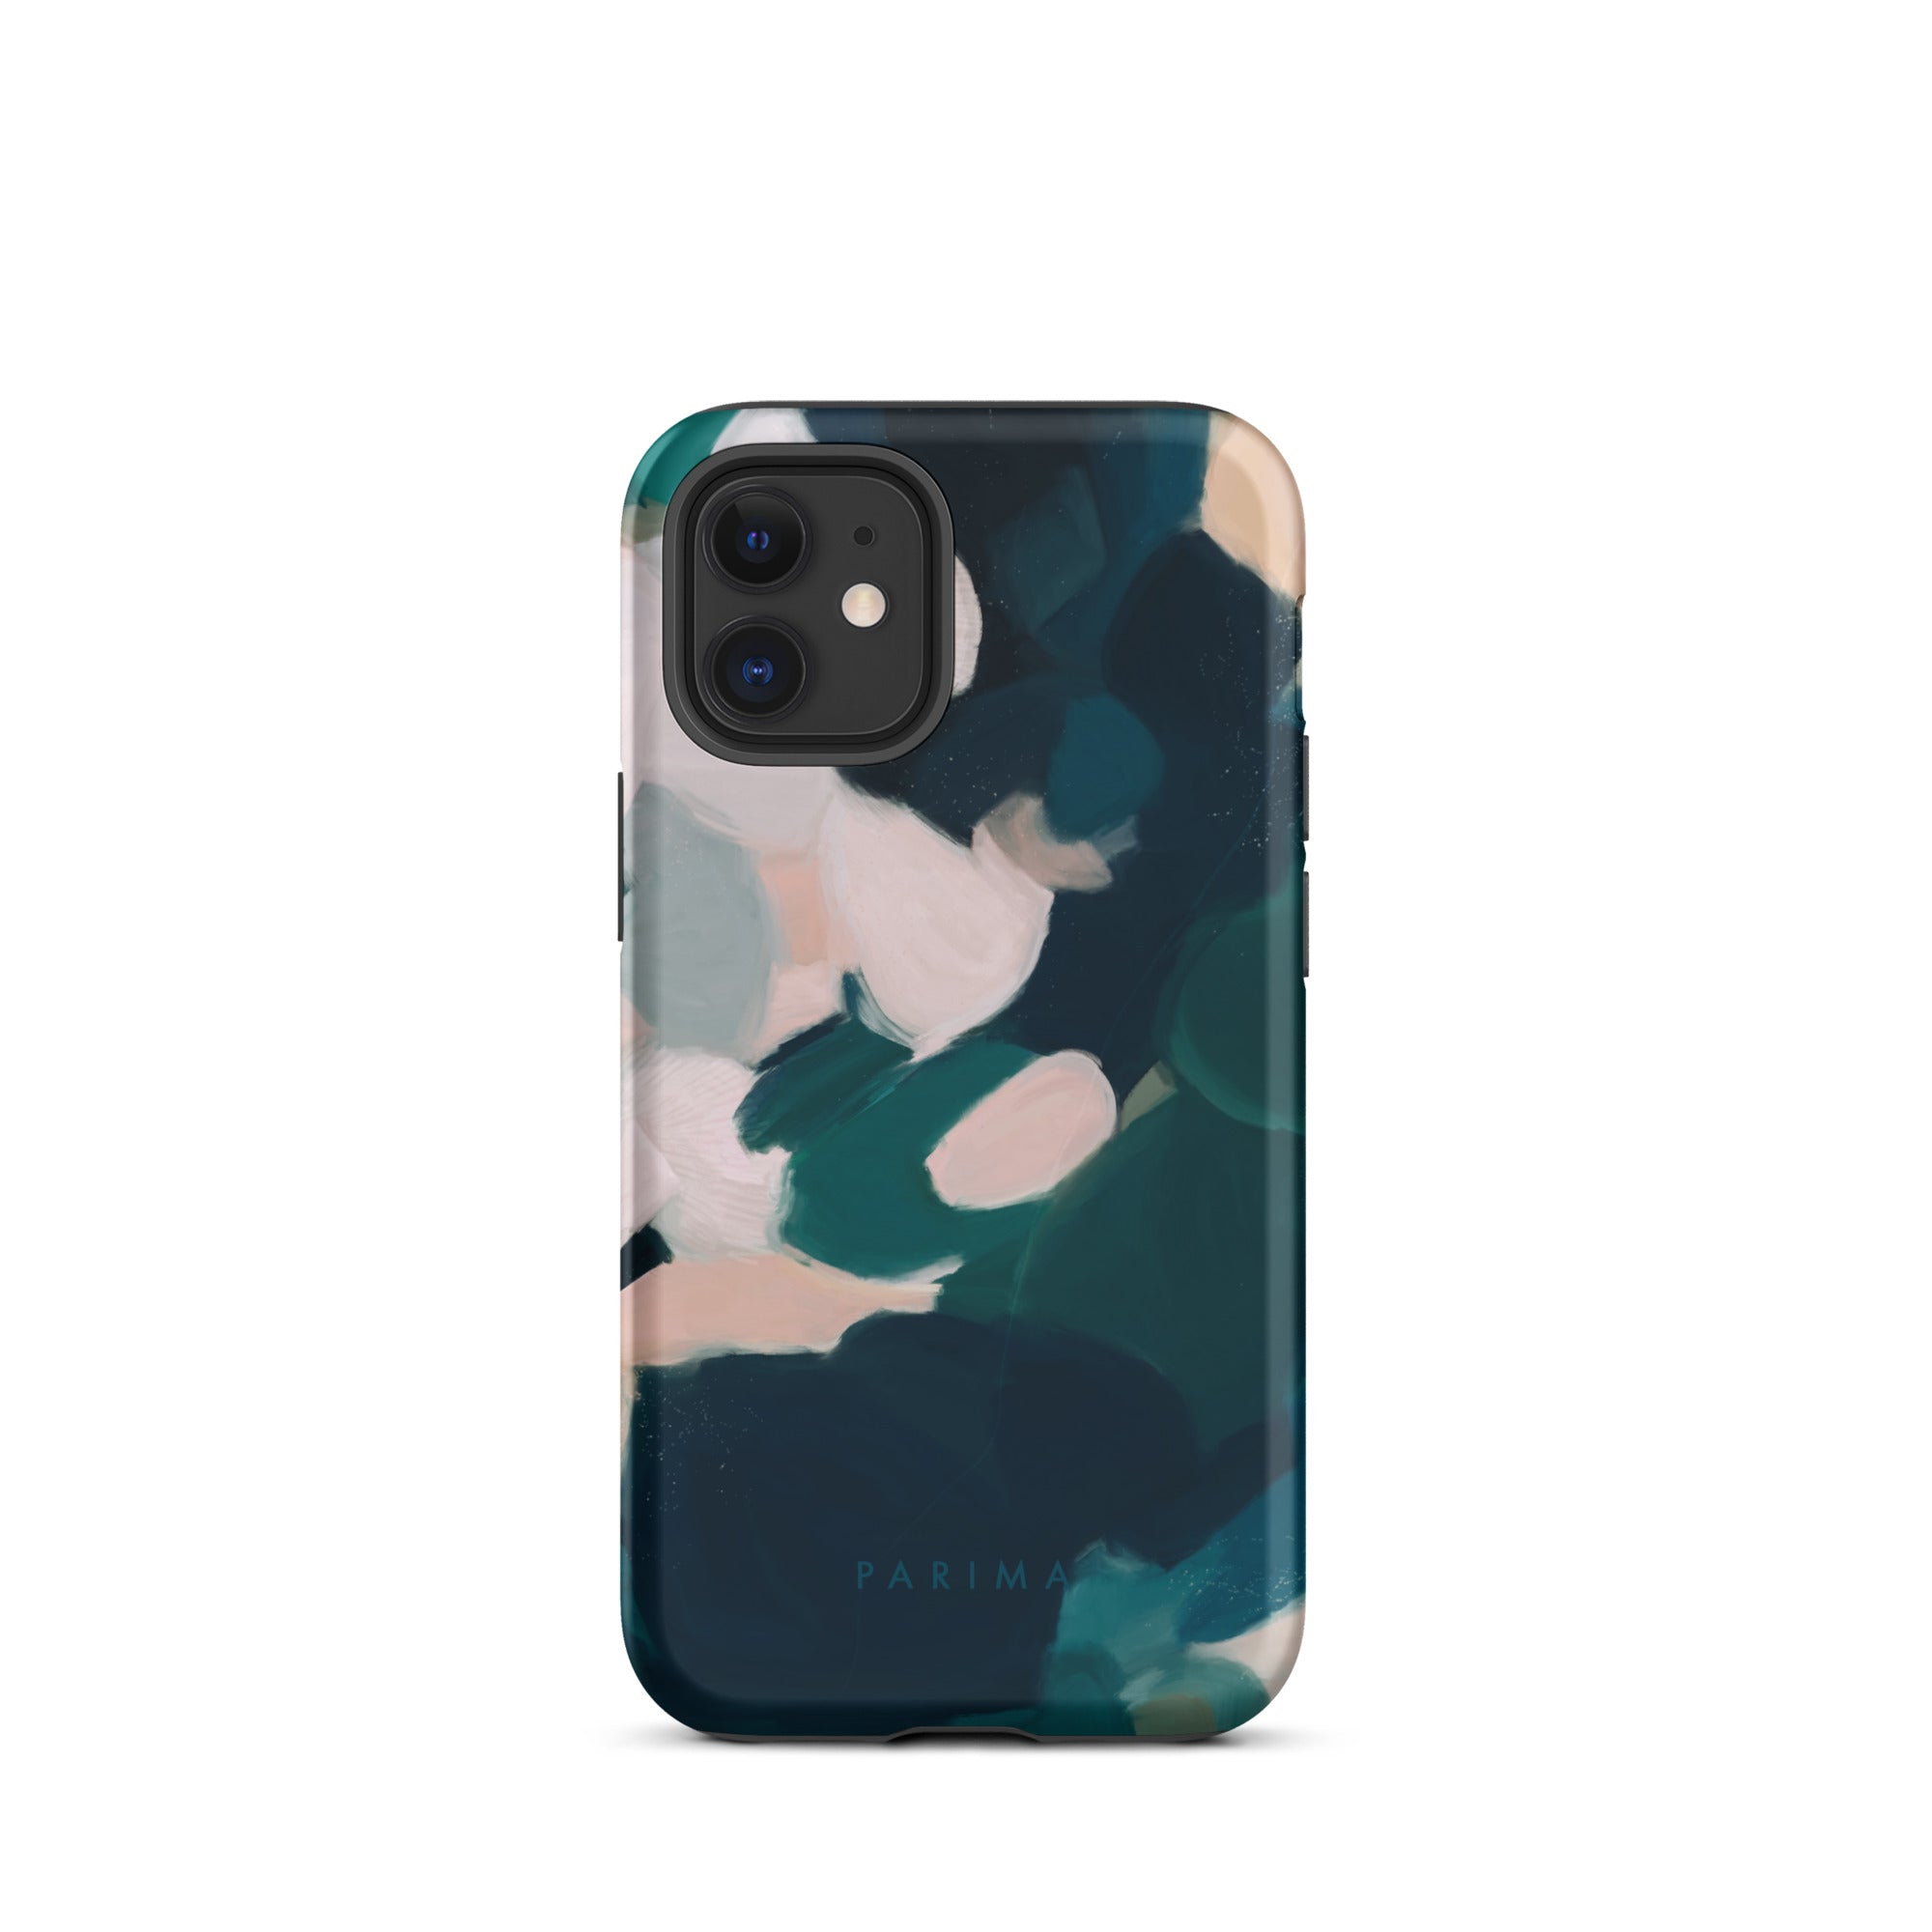 Aerwyn, green and pink abstract art - iPhone 12 mini tough case by Parima Studio